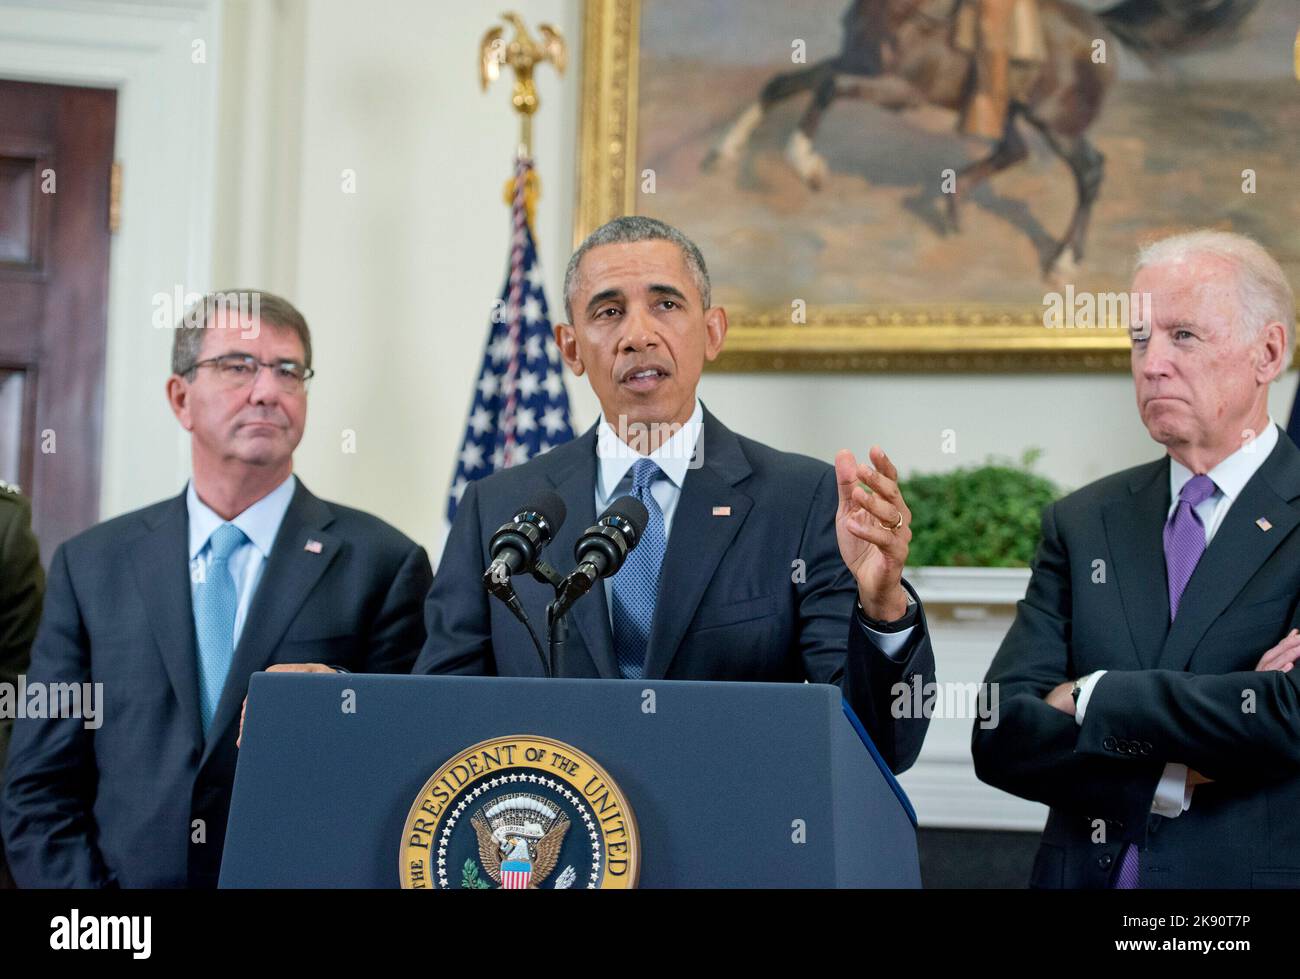 United States President Barack Obama announces he will keep 5,500 US troops in Afghanistan when he leaves office in 2017 and explains his reasoning for that action in the Roosevelt Room of the White House in Washington, DC on Thursday, October 15, 2015. Looking on are US Secretary of Defense Ashton Carter, left, and US Vice President Joe Biden, right. Credit: Ron Sachs/Pool via CNP Stock Photo